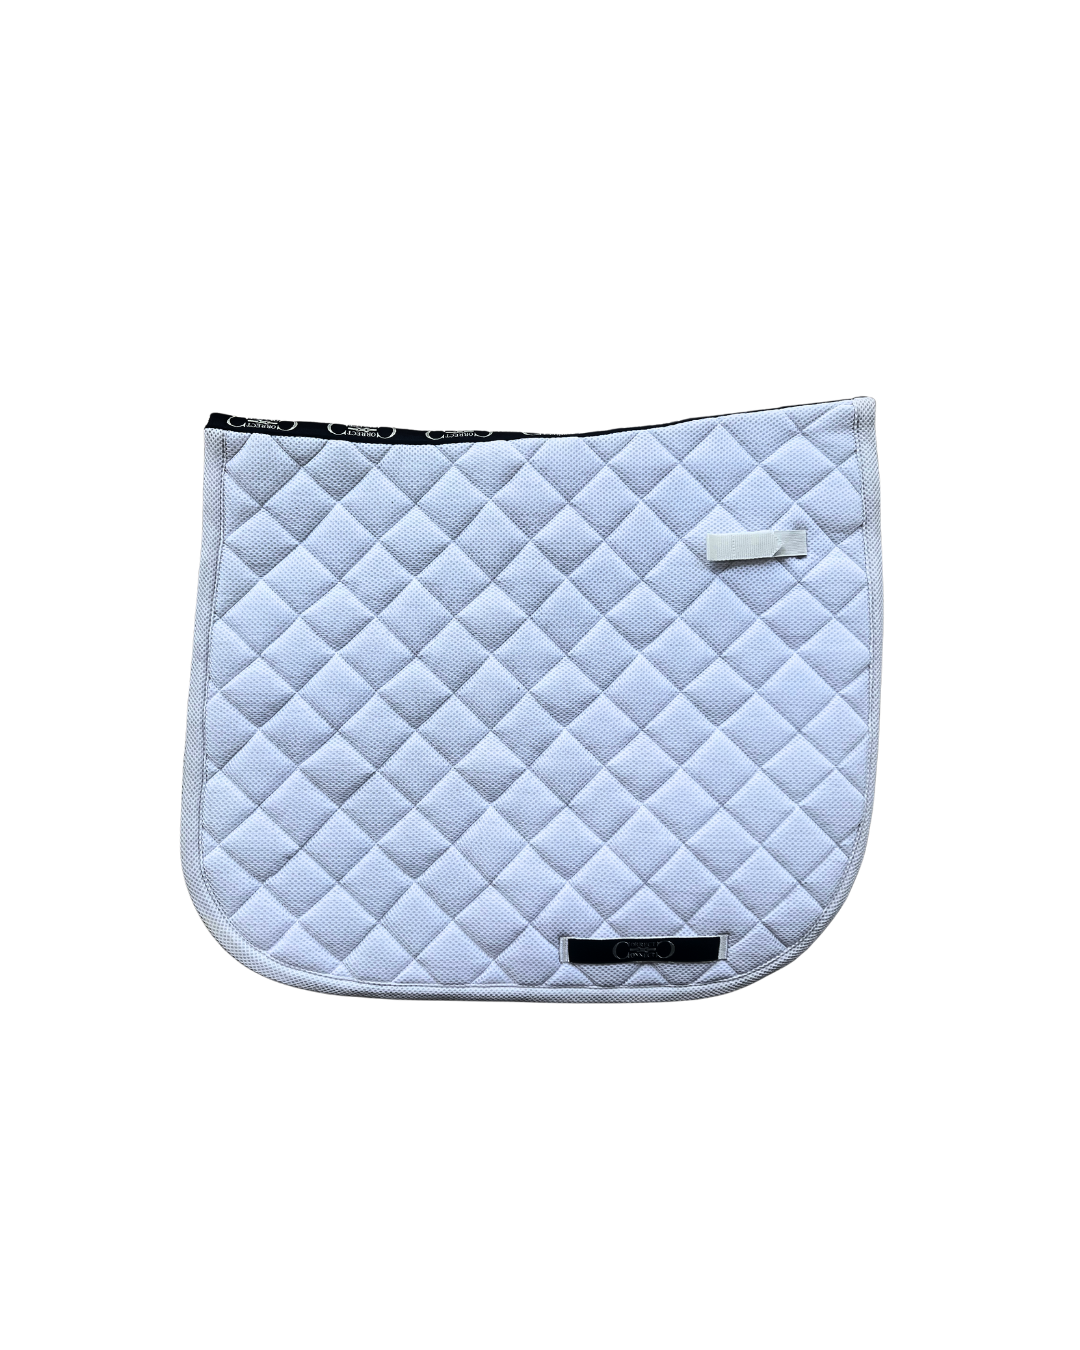 Dressage Mesh Saddle Pad with Quick Dry Cotton Lining in Navy, White or Black